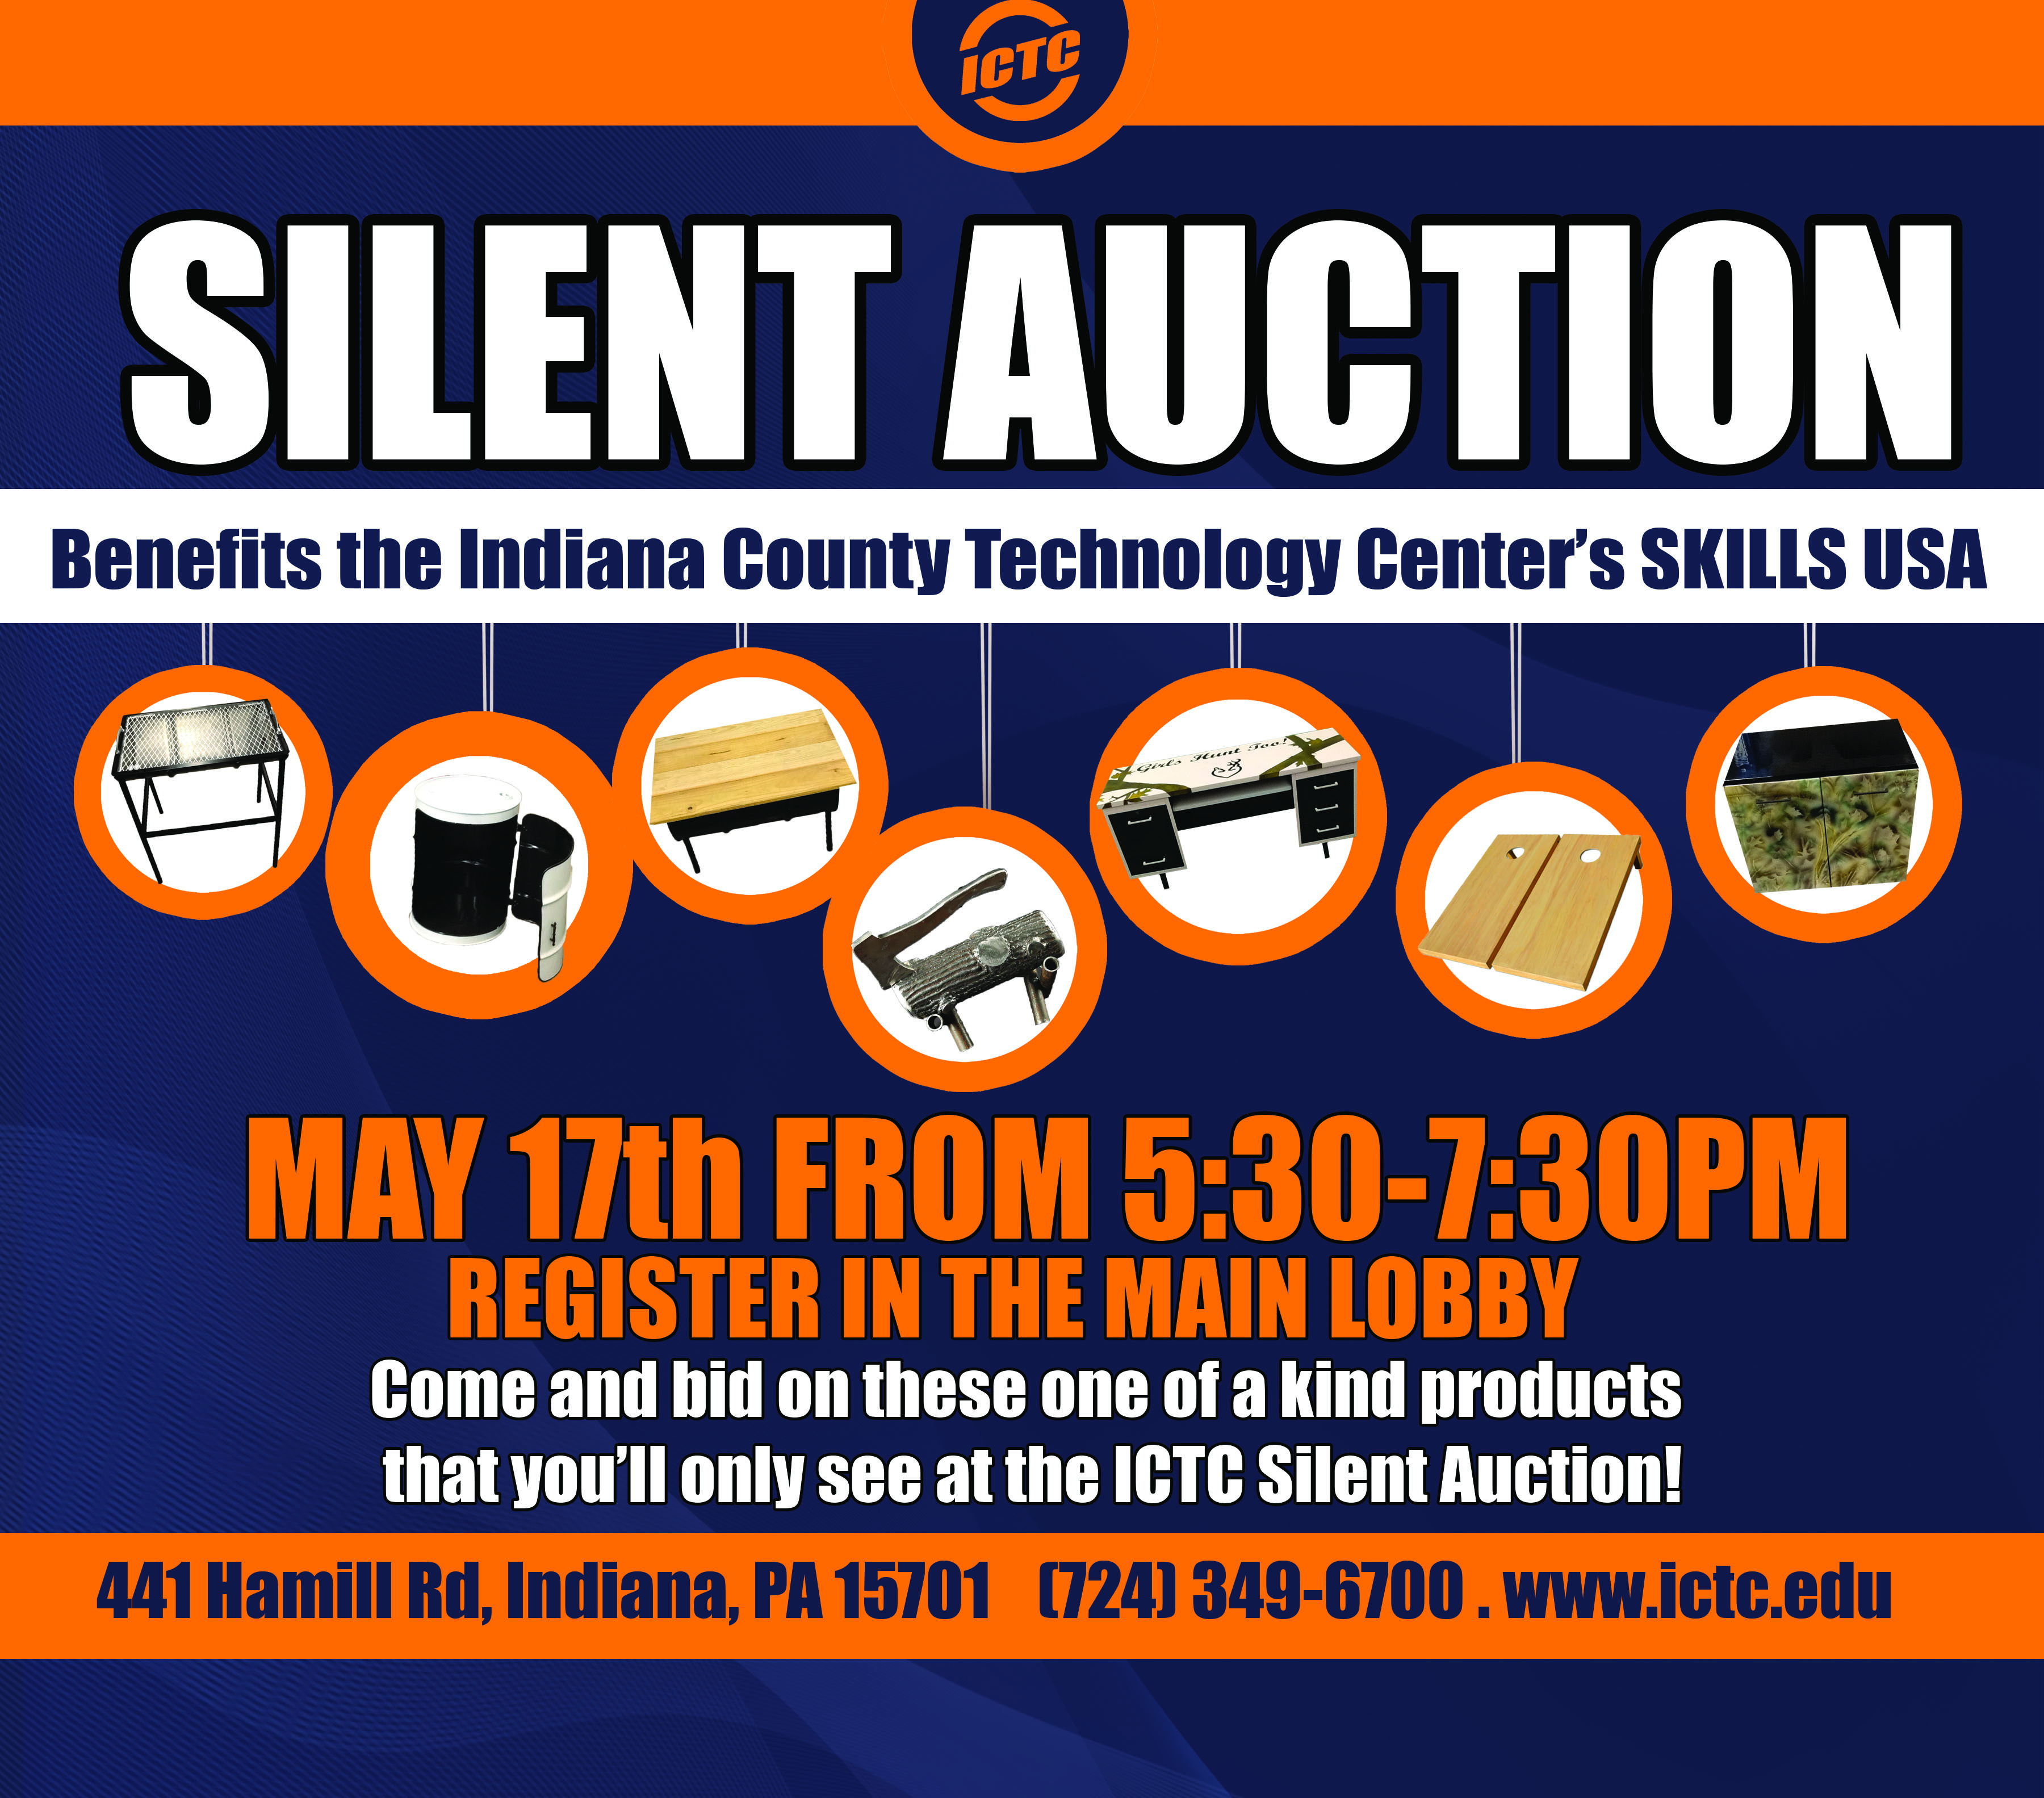 SILENT AUCTION AND ADULT ED ENROLLMENT EVENT - ICTC